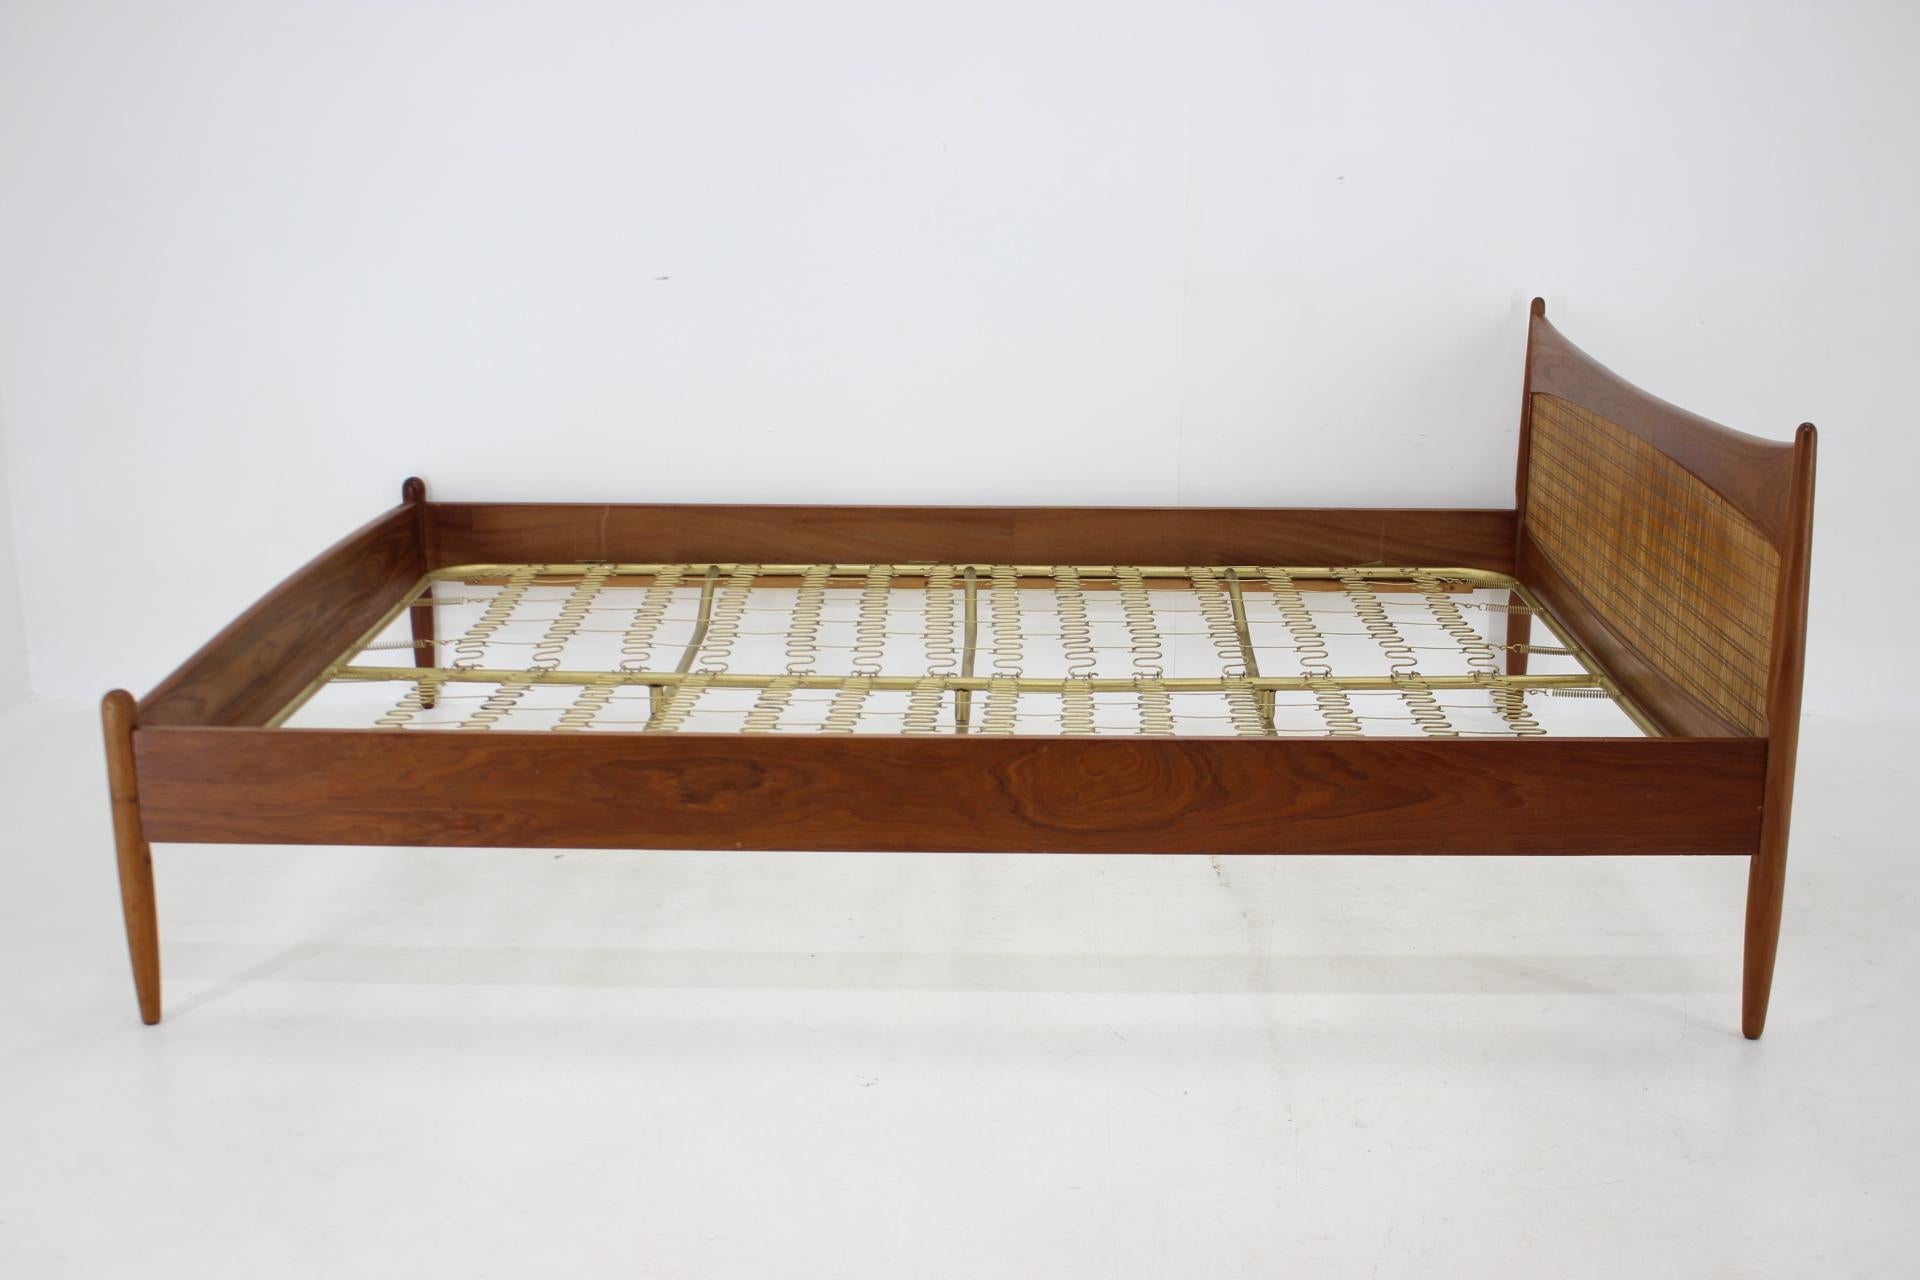 - Good original condition with minor signs of use.
- Mattress 190cm x 140cm
- Can be dismantled.